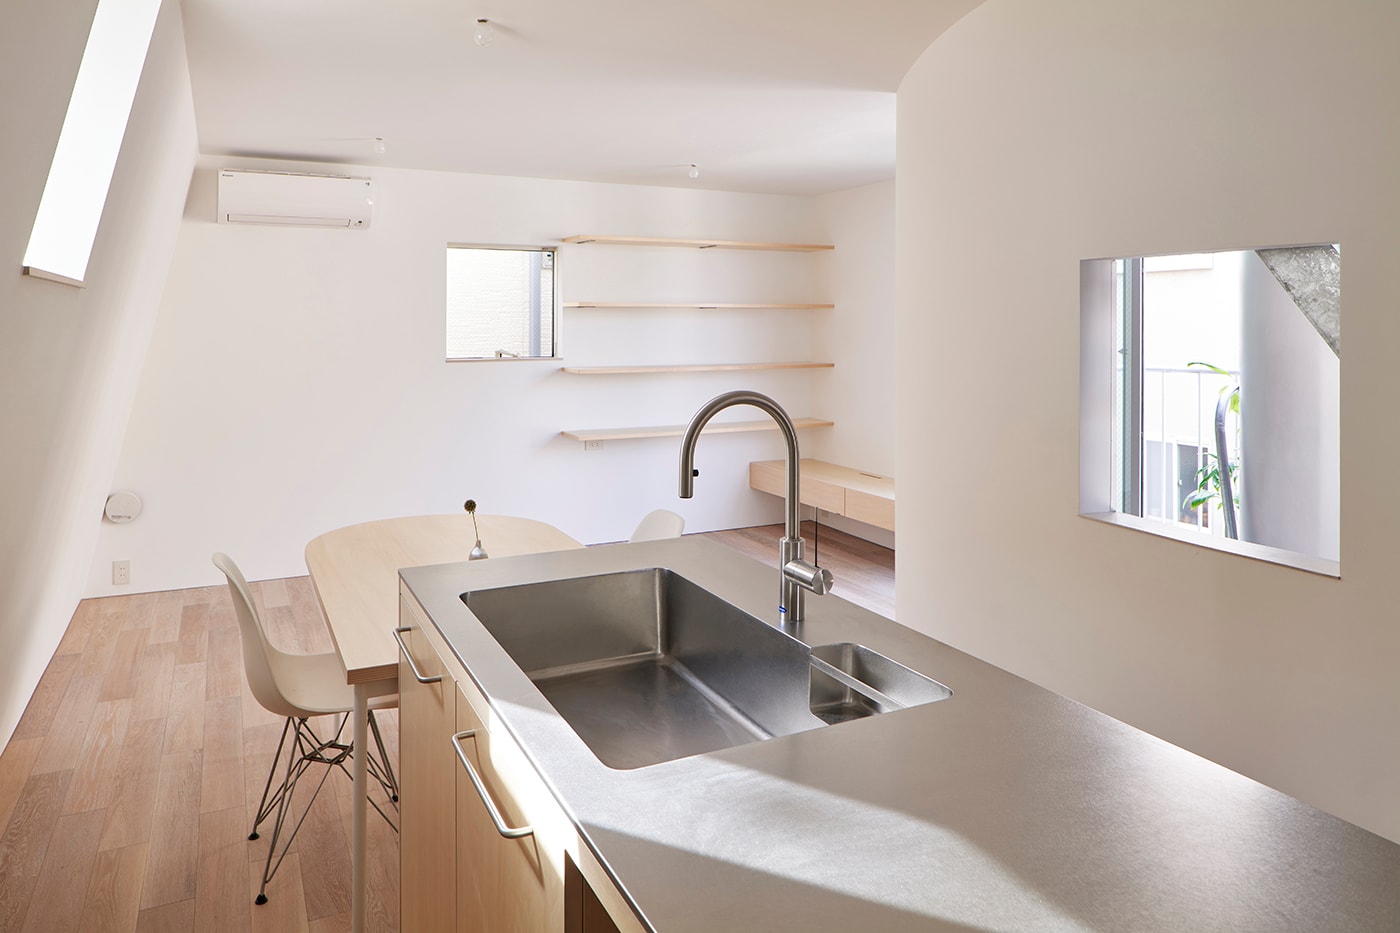 NOT Architects Studio "Scoops Up" Surrounding Scenery for Skinny Tokyo House